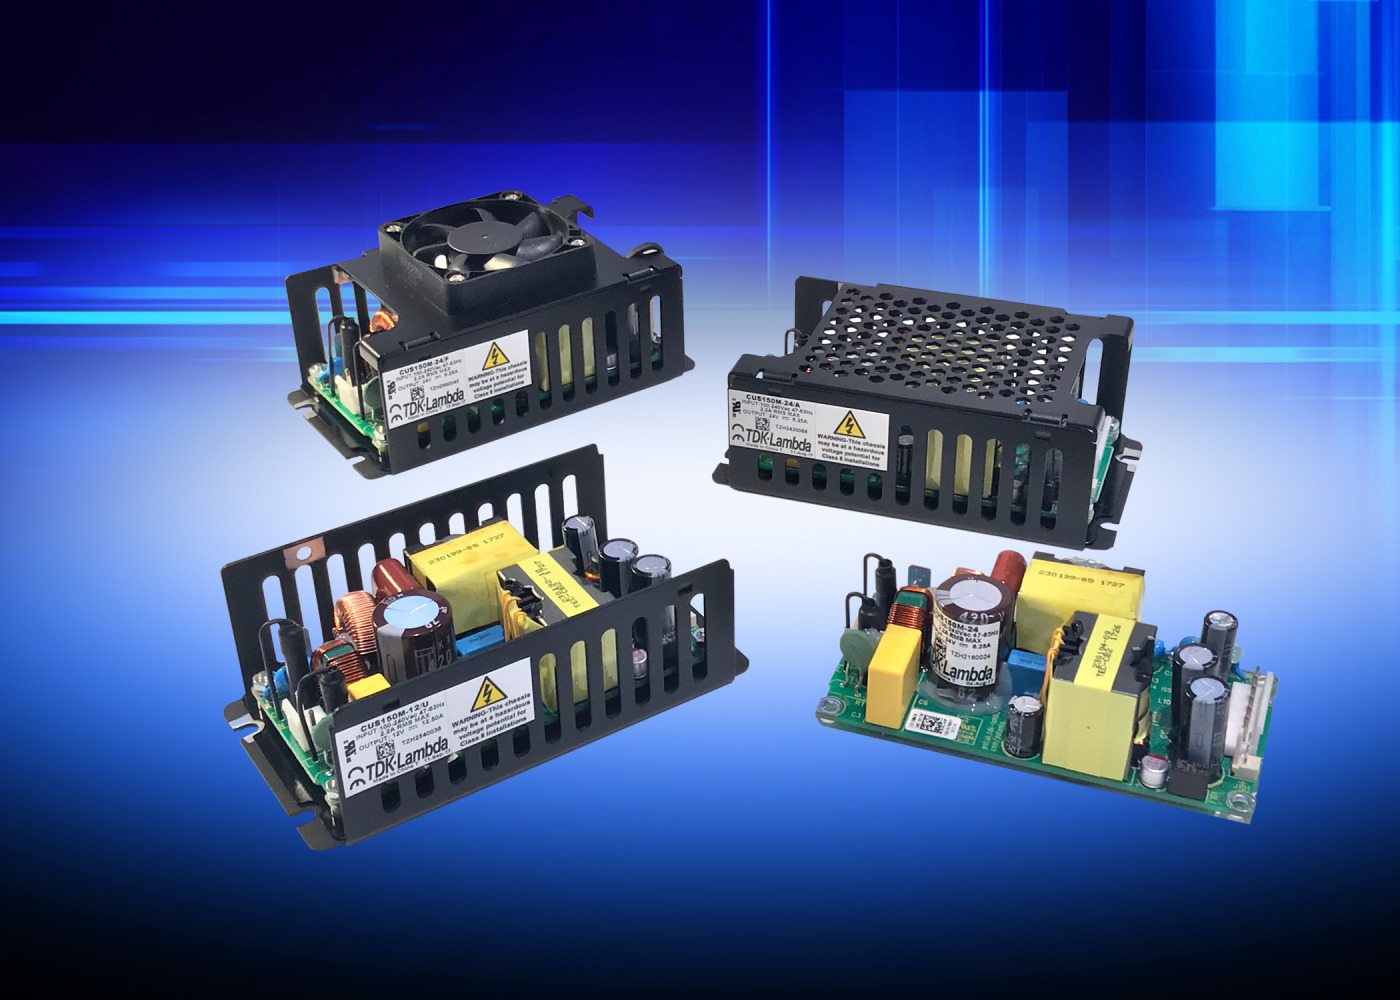 Medical / ITE Certified 2x4” Power Supplies Provide Optimum Performance up to 85°C Ambient Temperatures